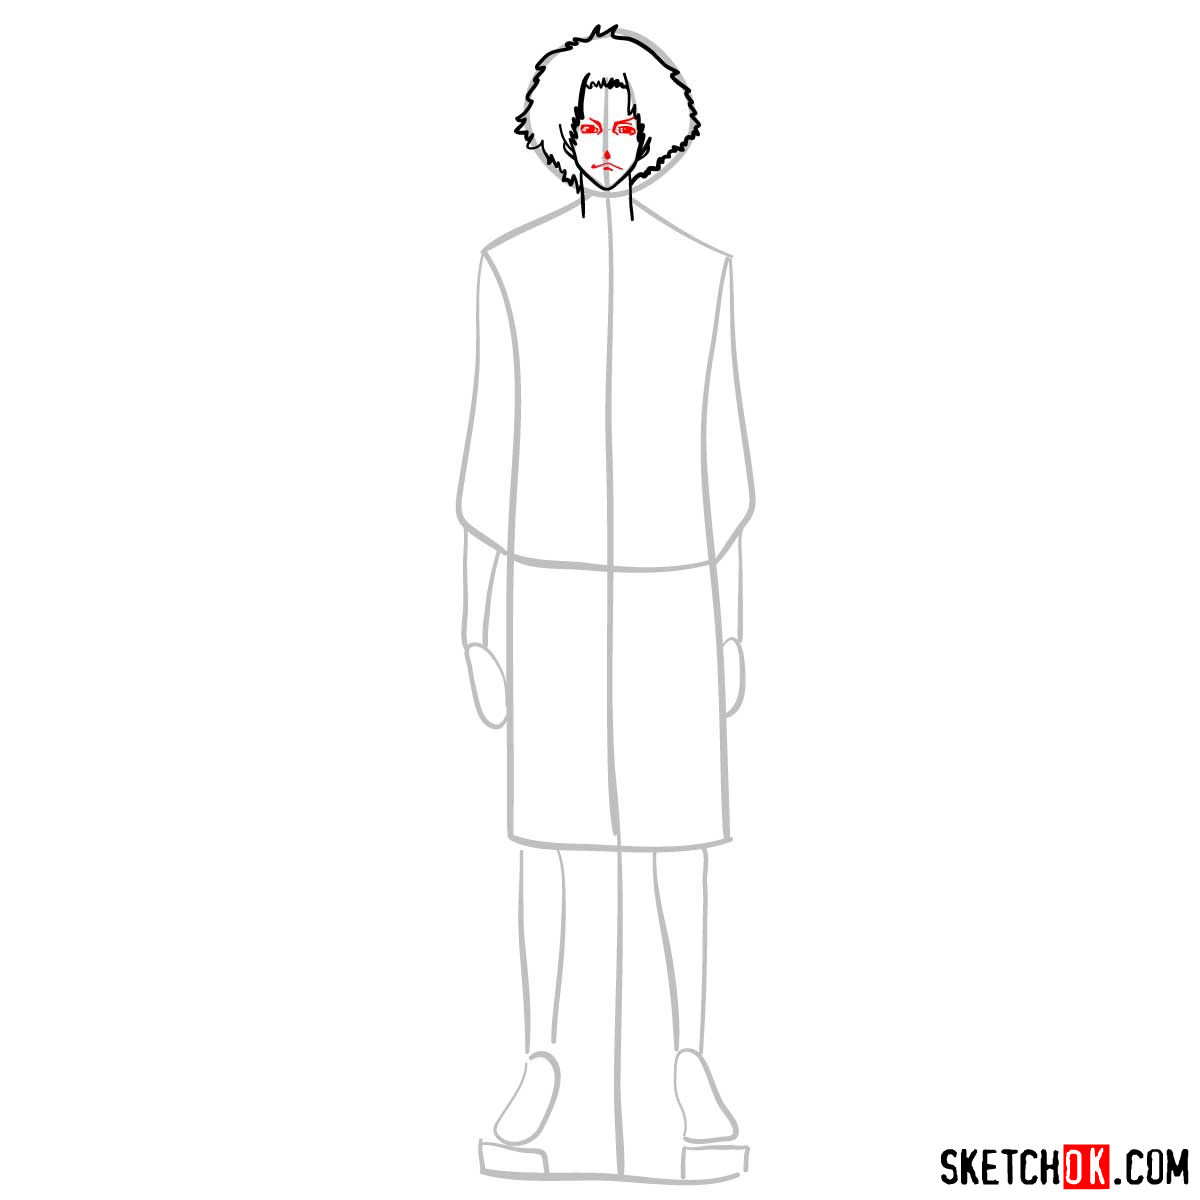 How to draw Mugen from Samurai Champloo anime - step 05